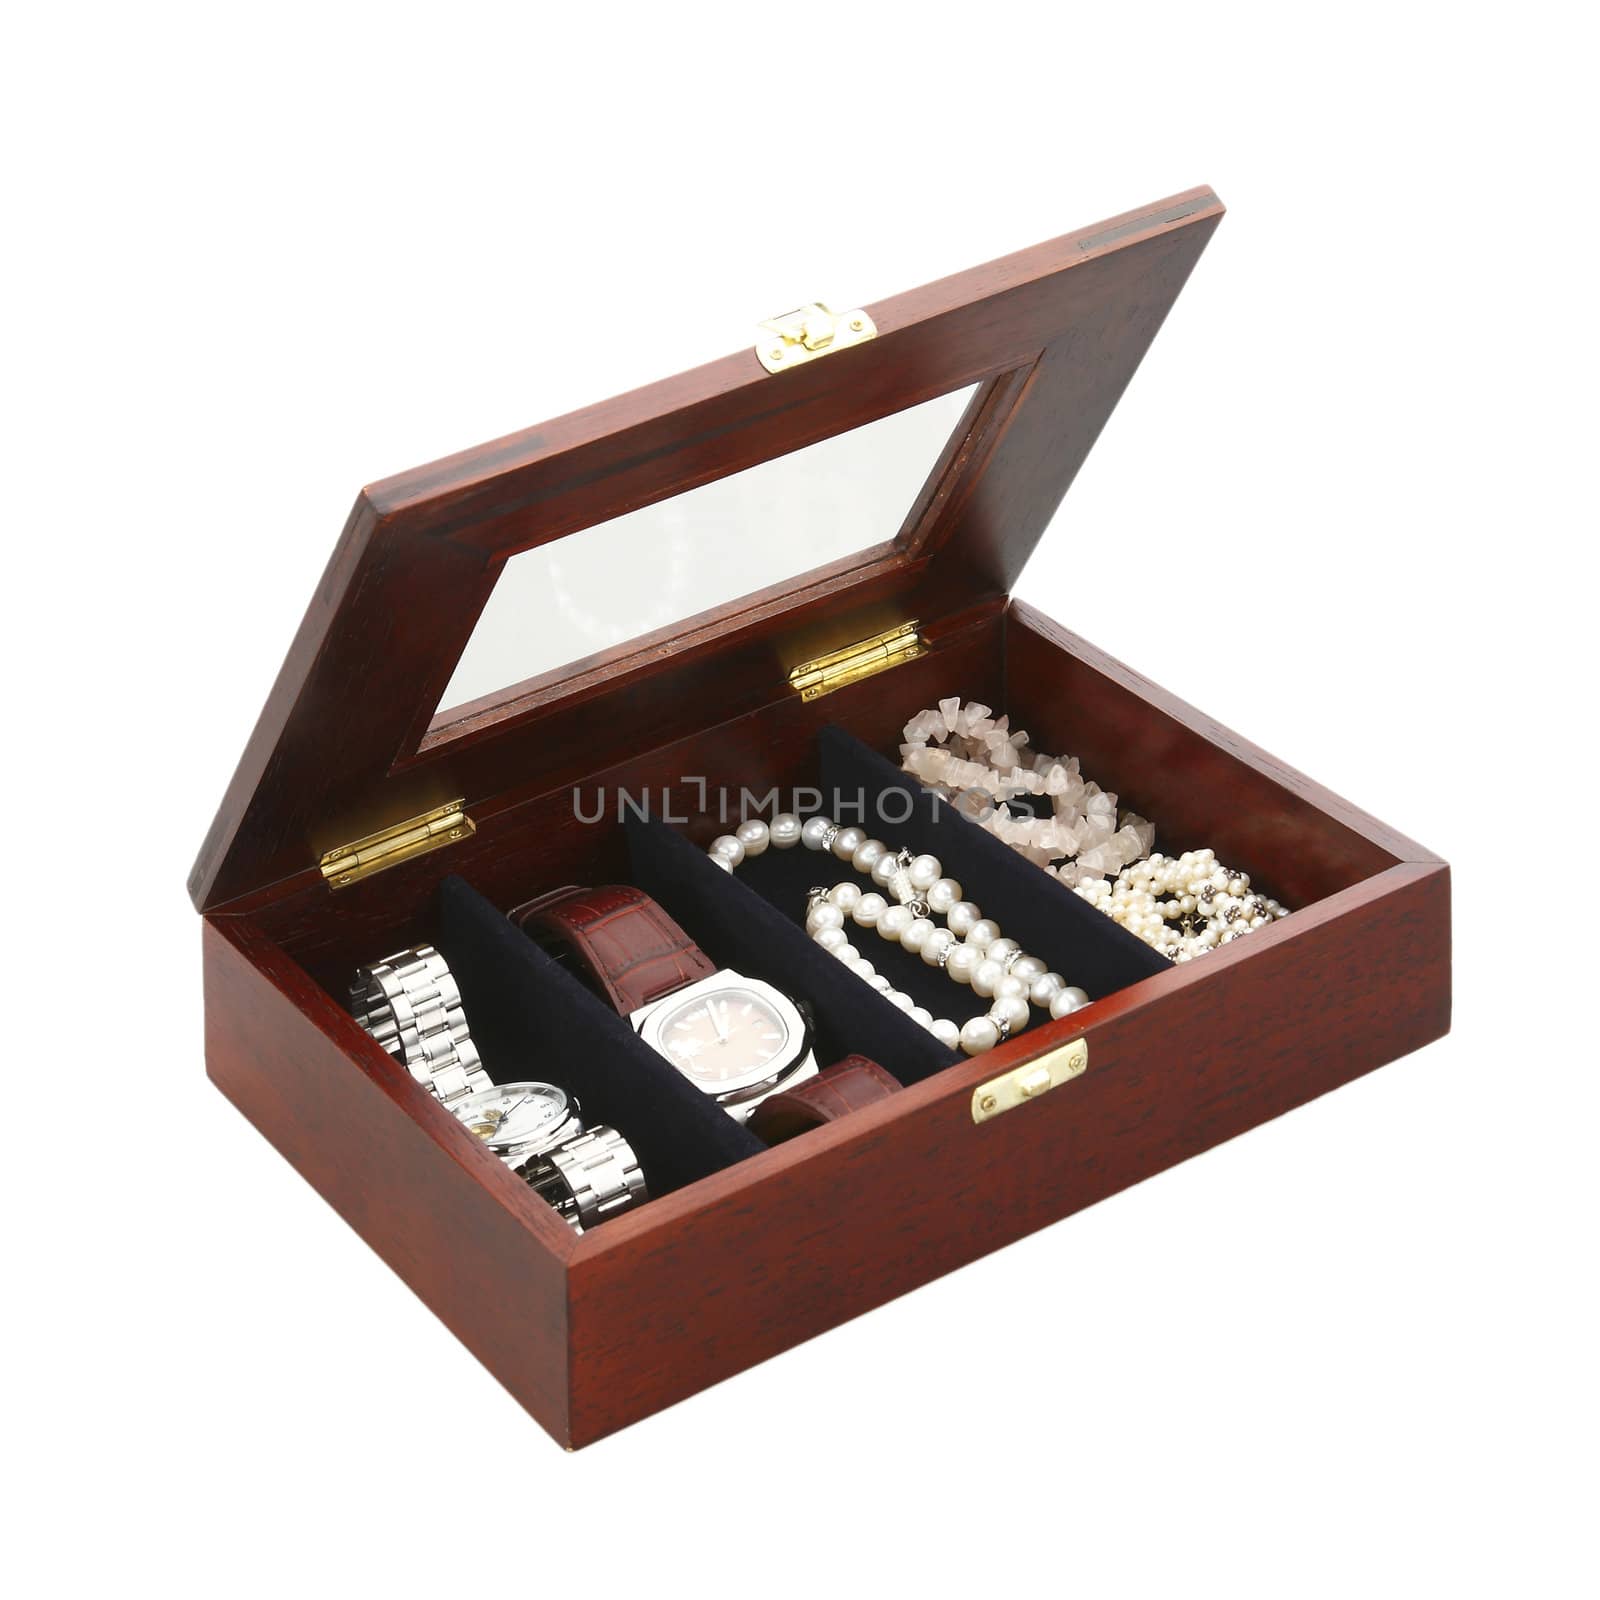 Nice wooden gift box for keep belonging and miscellaneous stuffs isolated on white